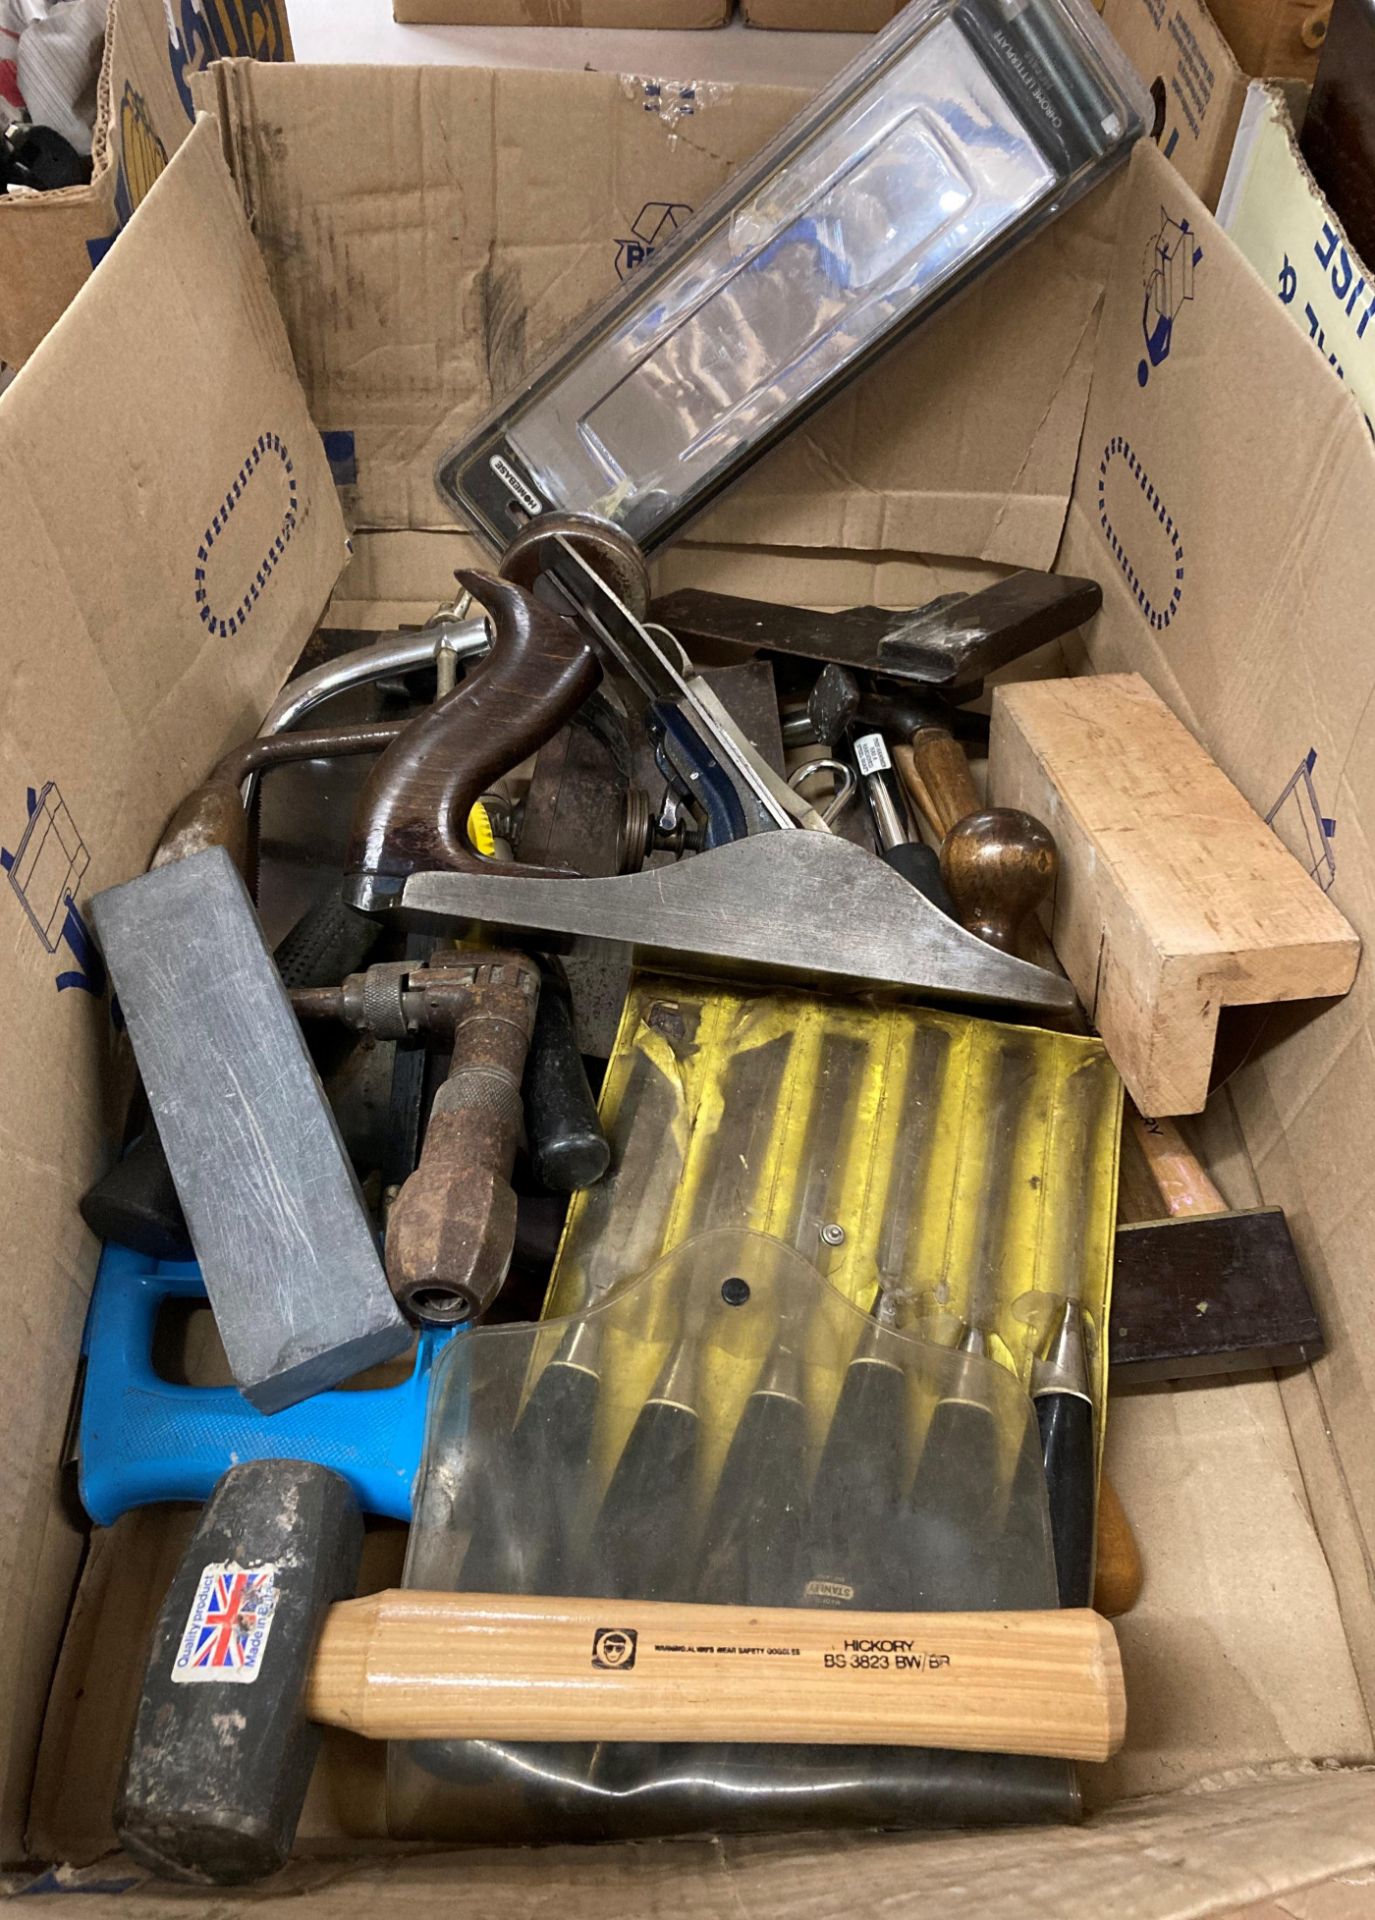 Contents to box - assorted hand tools including Record No 4½ plane, bit & brace, chisels, hammers,